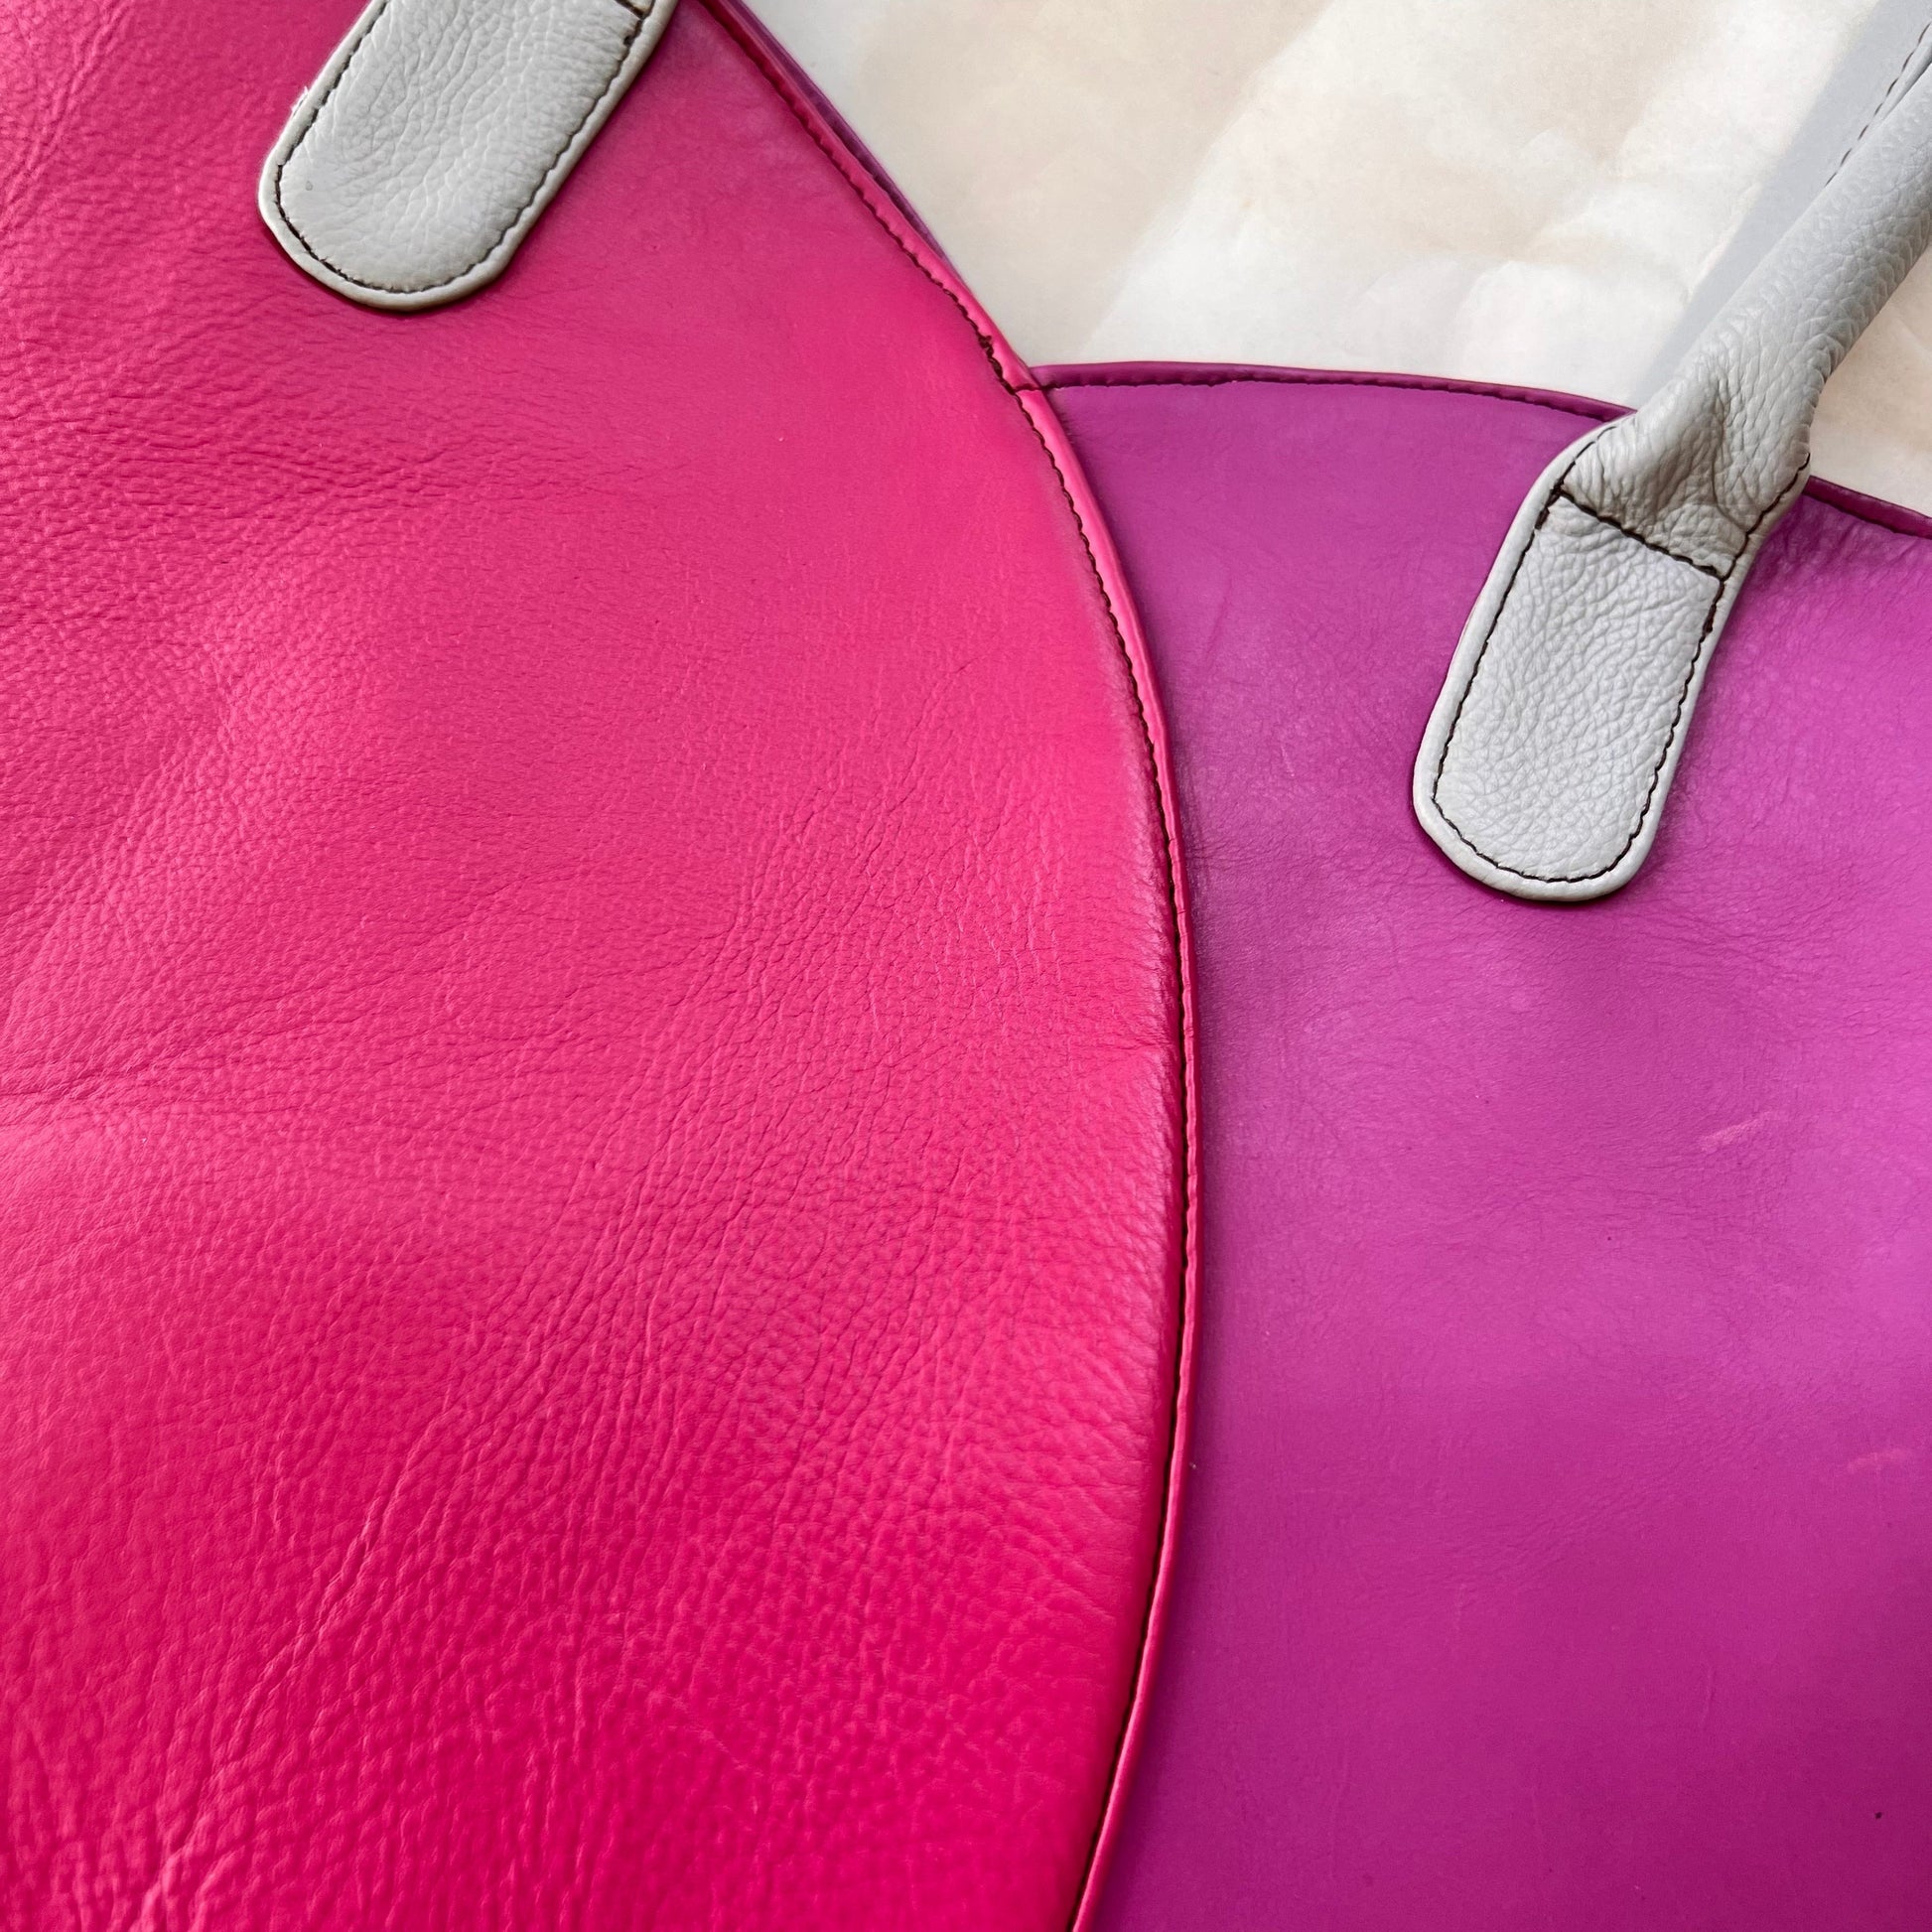 close-up of valeria tote that is half pink and half light plum with grey handles.